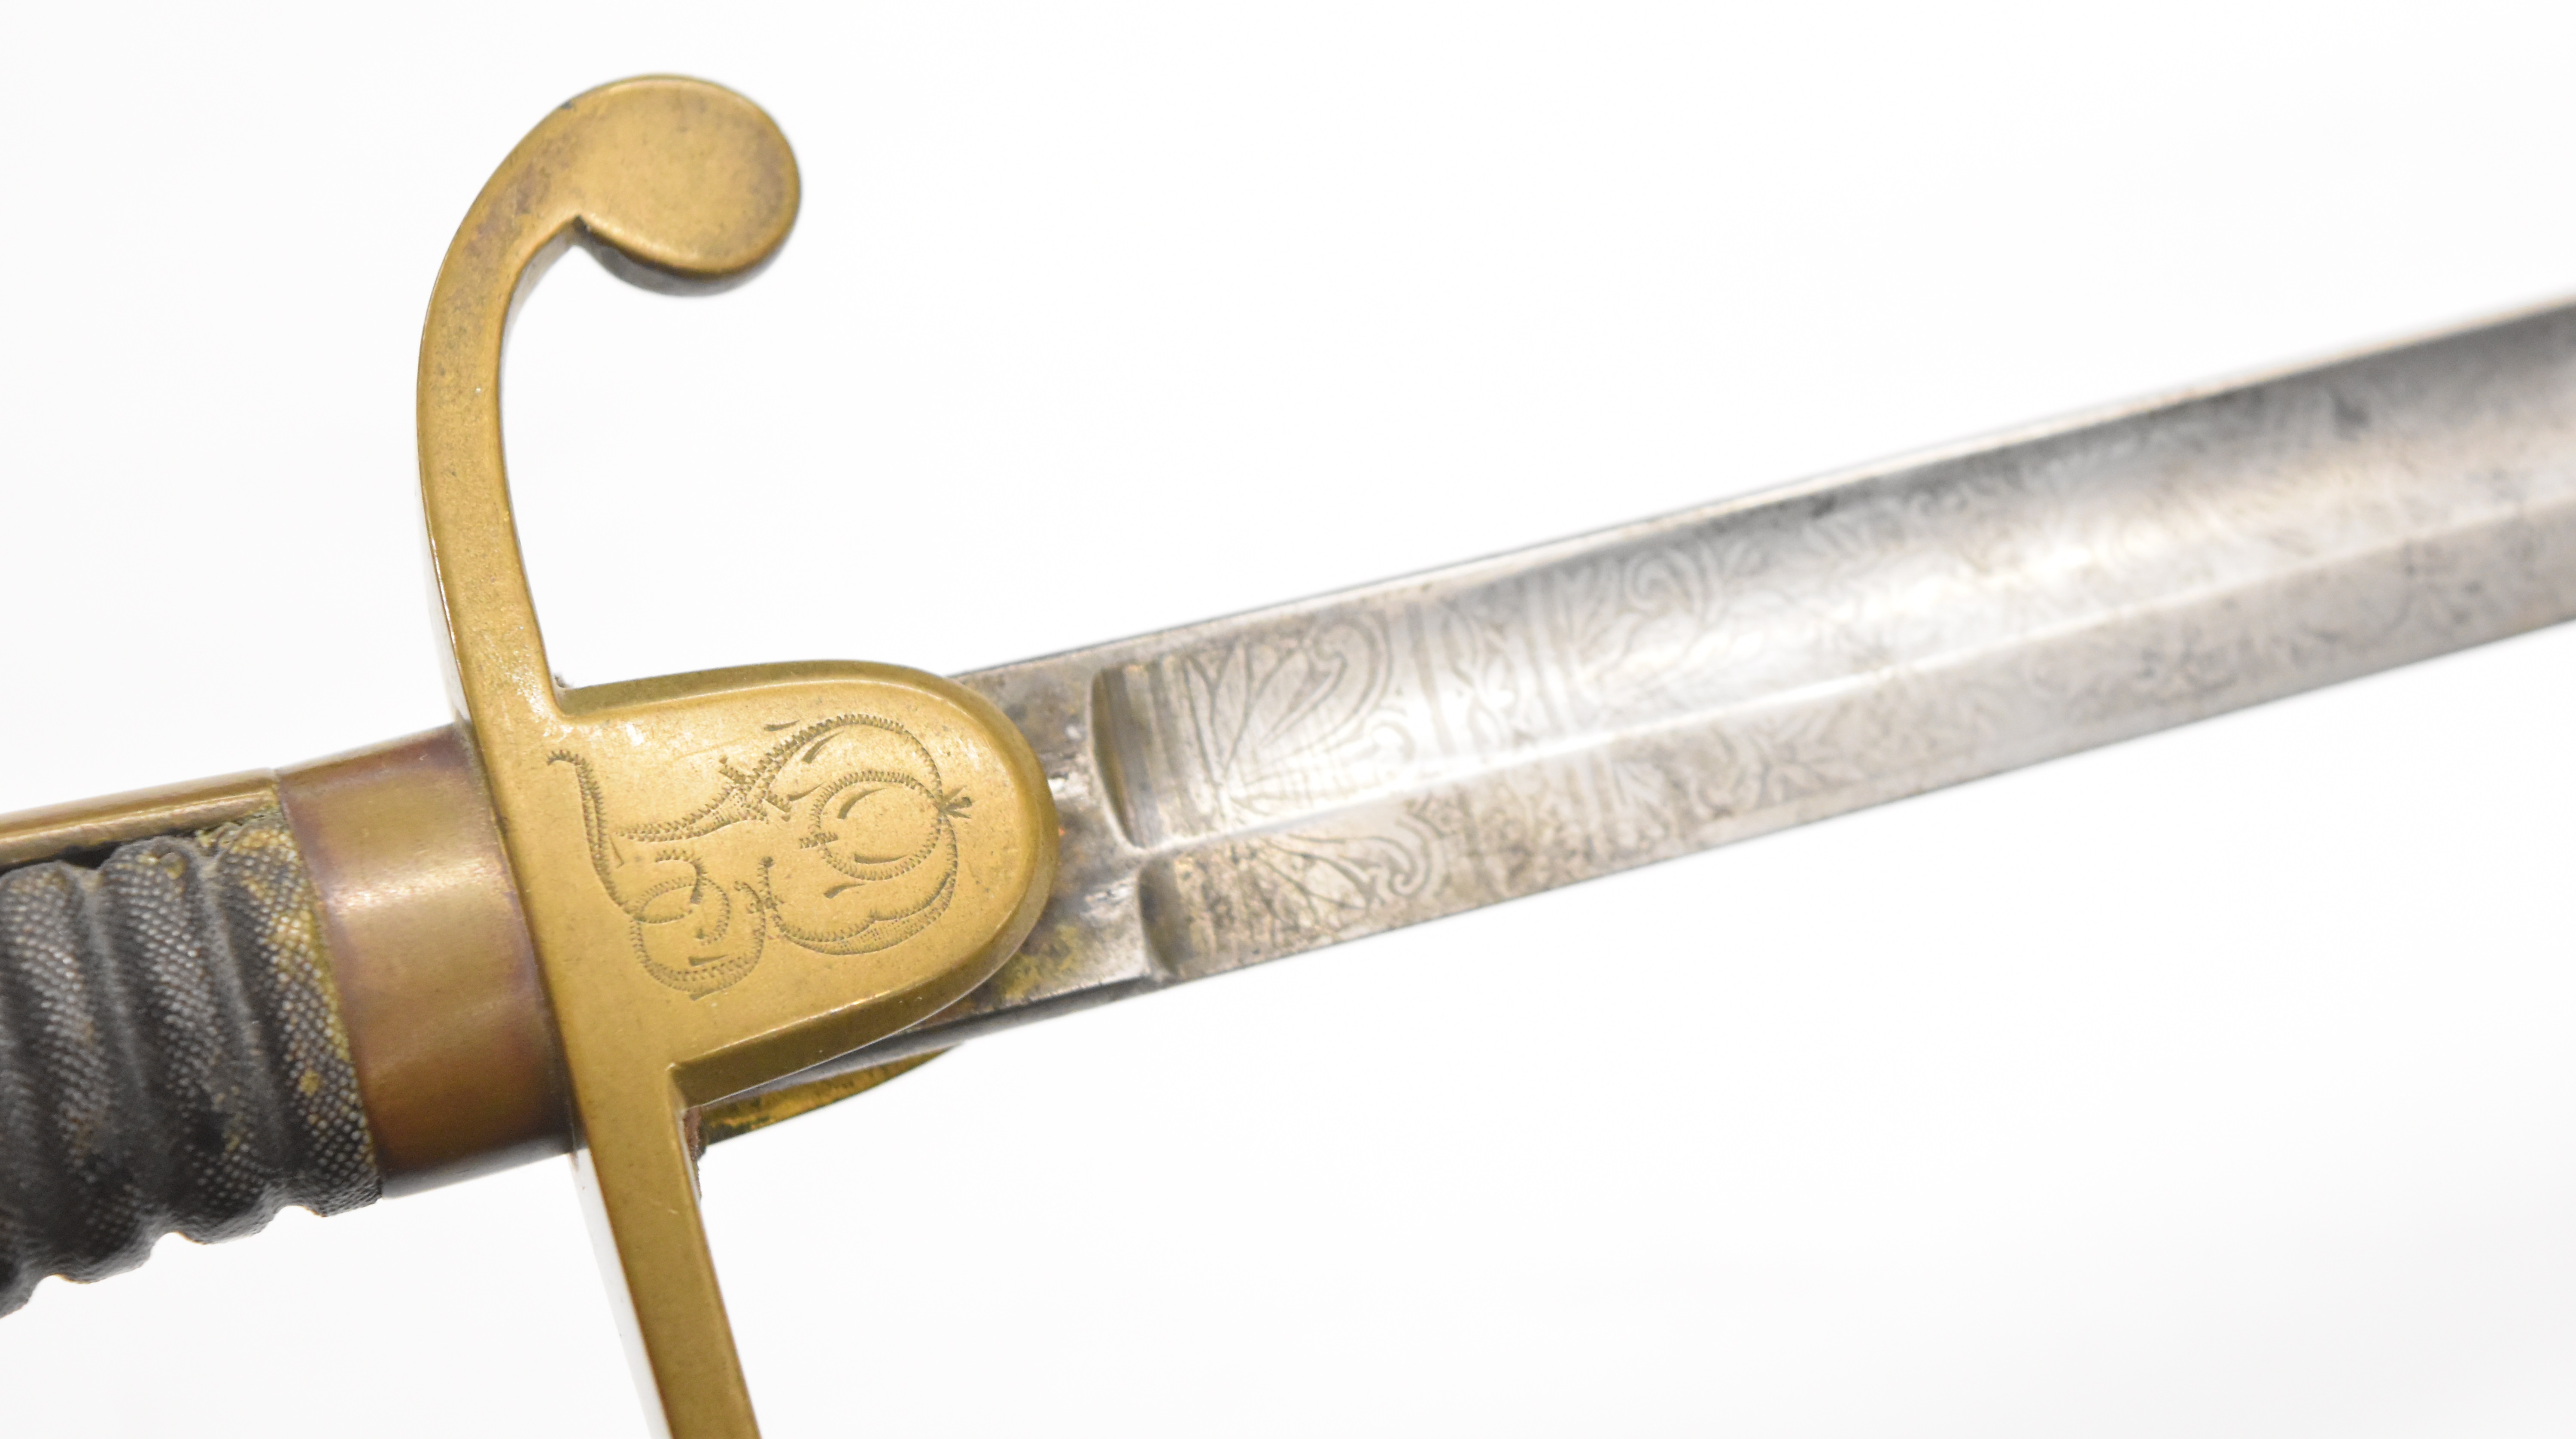 Prussian Artillery Officer's sword with stirrup hilt, shagreen grip, 80cm decorated blade and - Image 6 of 11